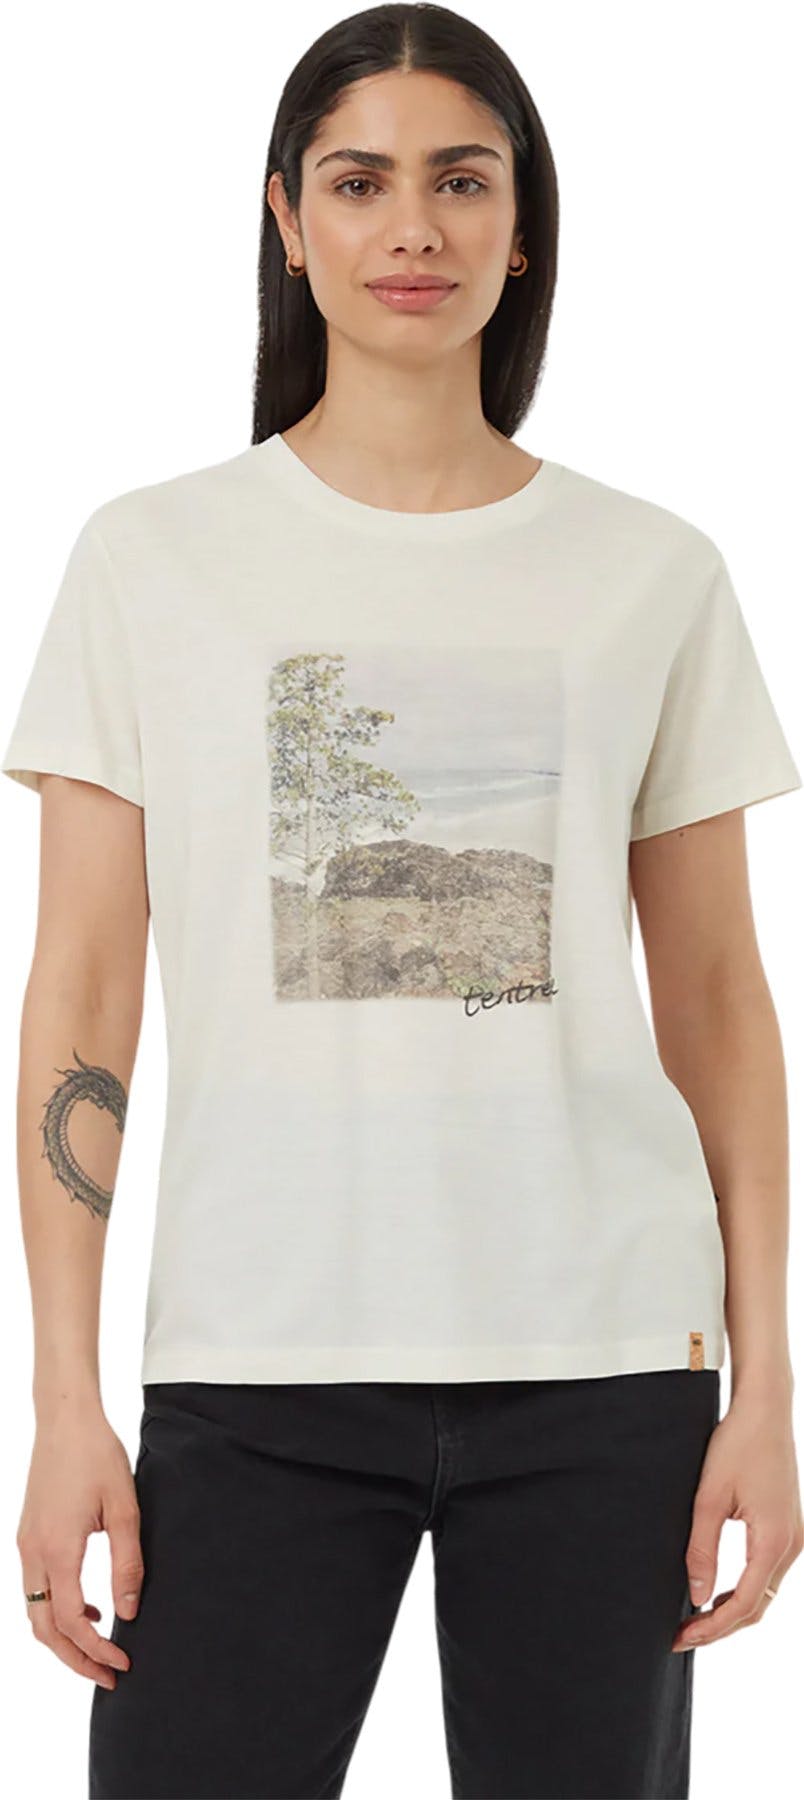 Product image for Vintage Photo T-Shirt - Women's